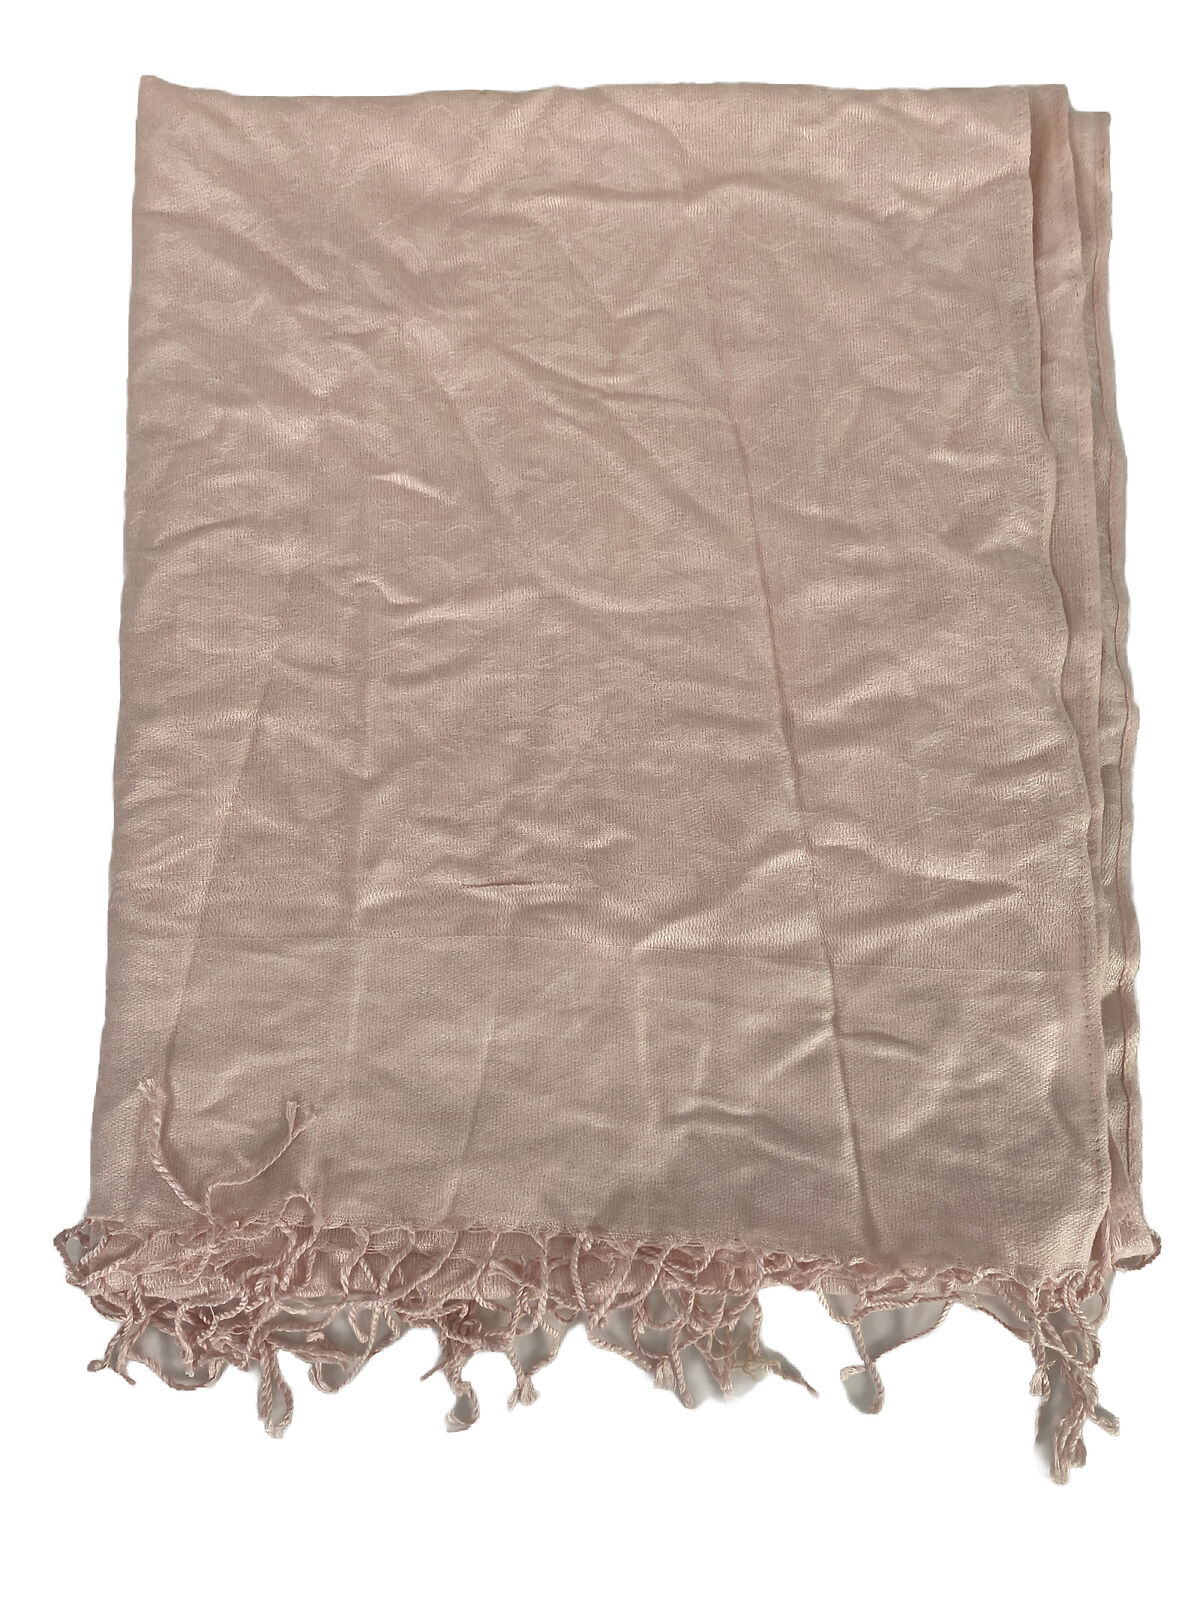 NEW Chico's Women's Pink Oversized Fringed Lightweight Scarf - One Size